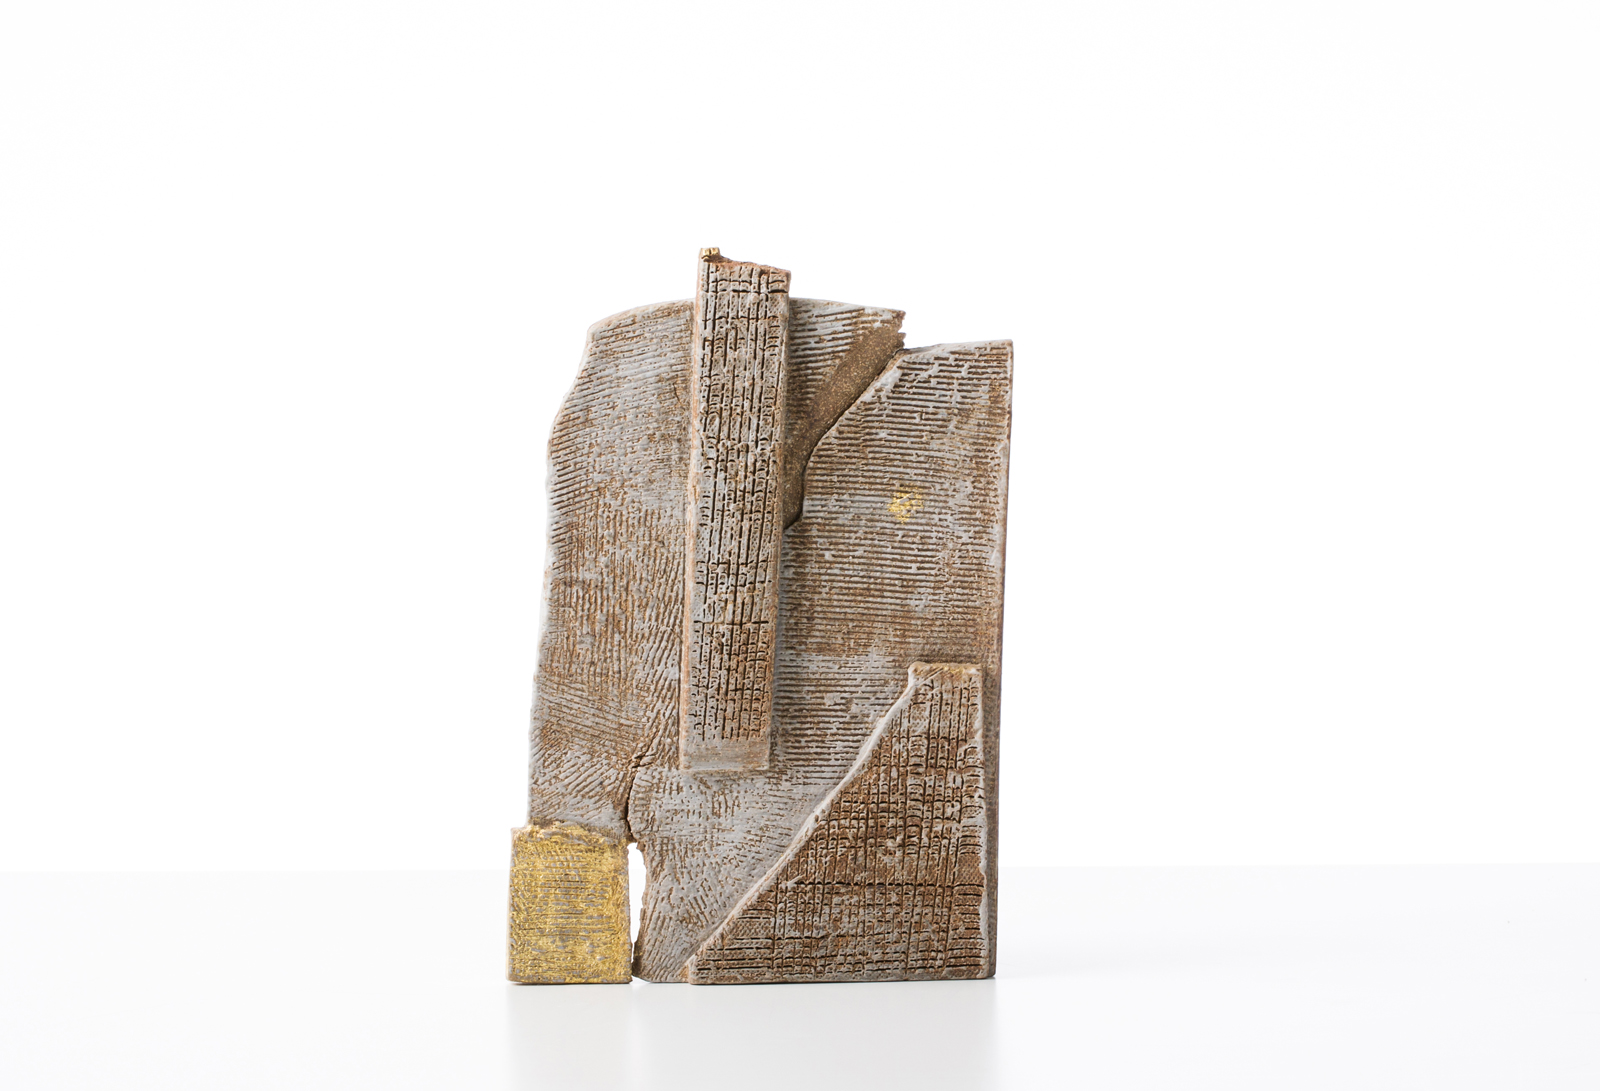 STELE #26, 2016 stoneware, slip and gold leaf, 8 3/4 x 6 x 2 1/2 in private collection